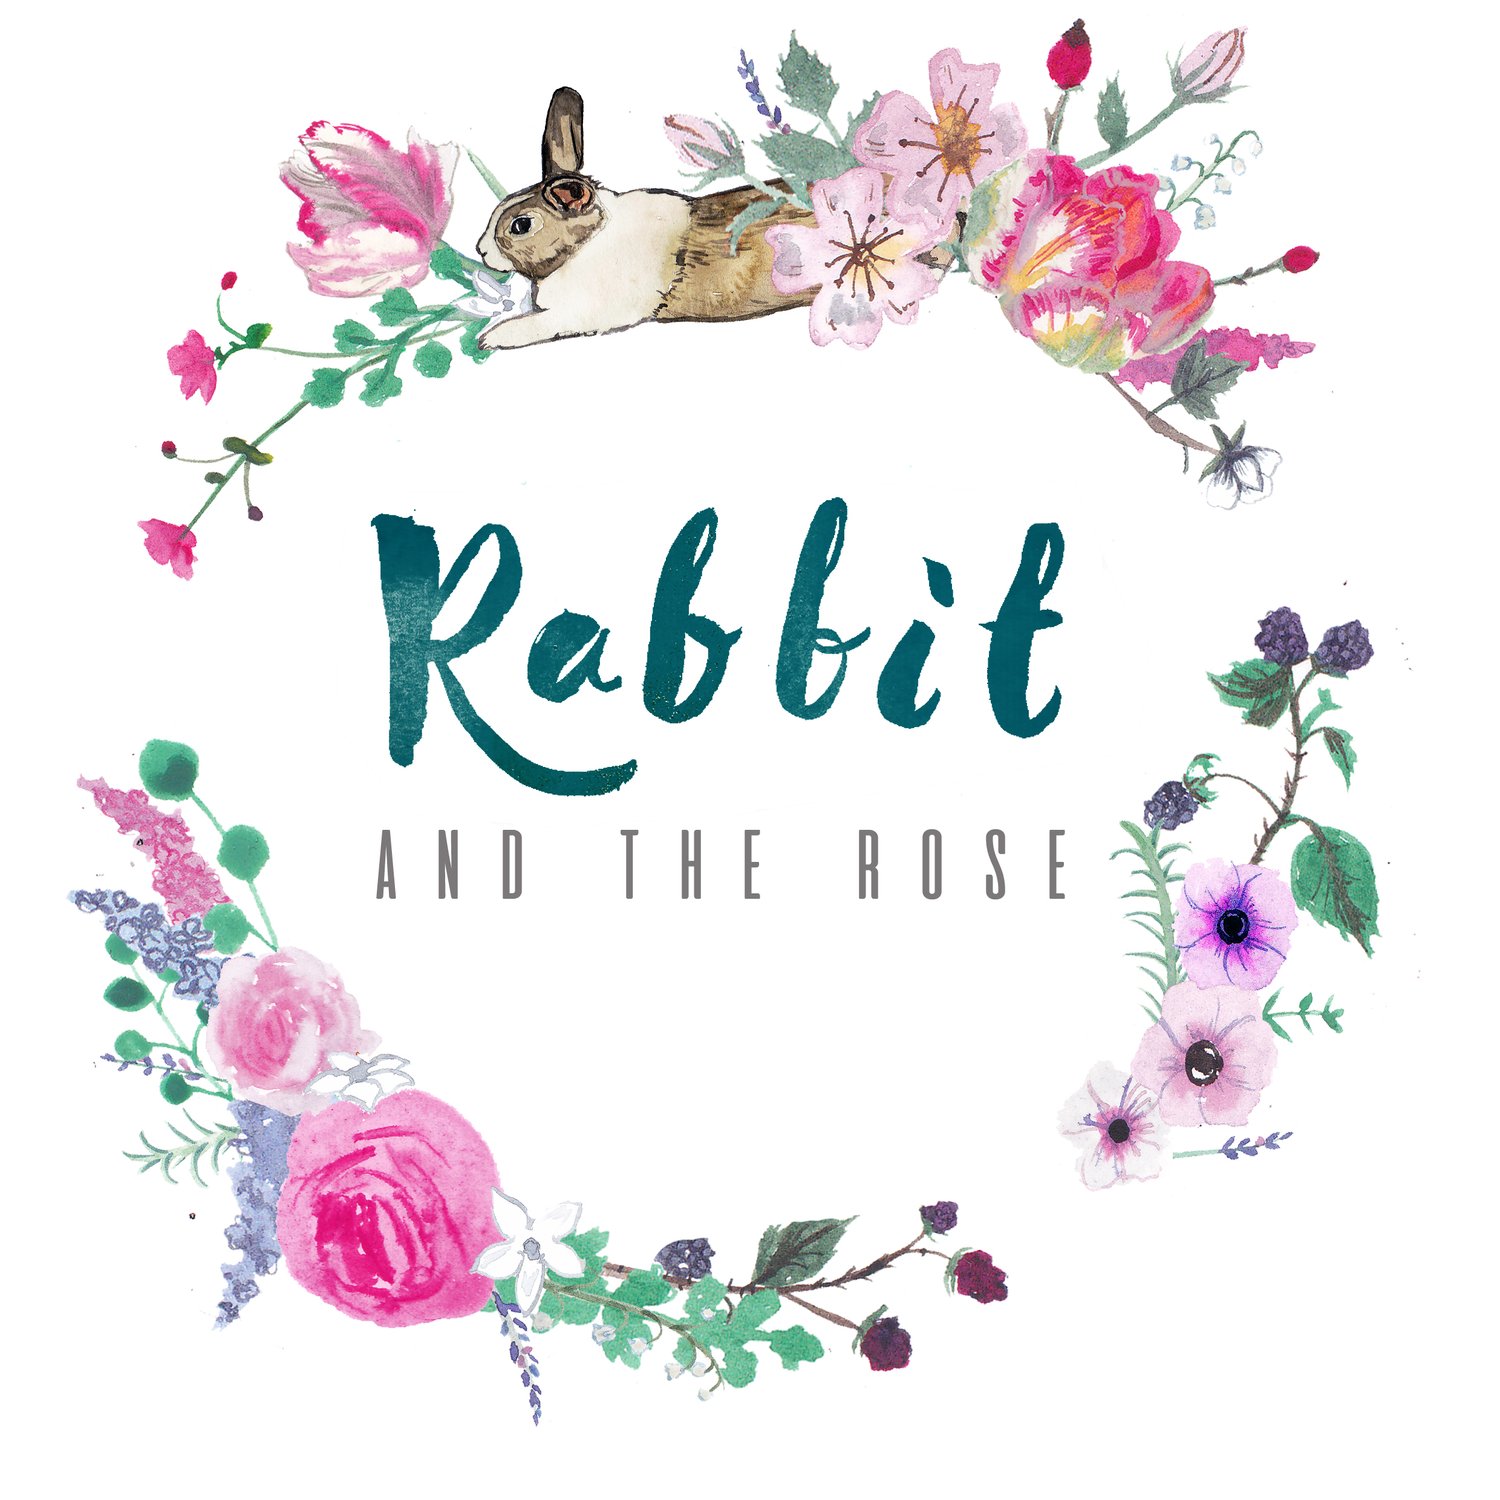 Rabbit and the Rose